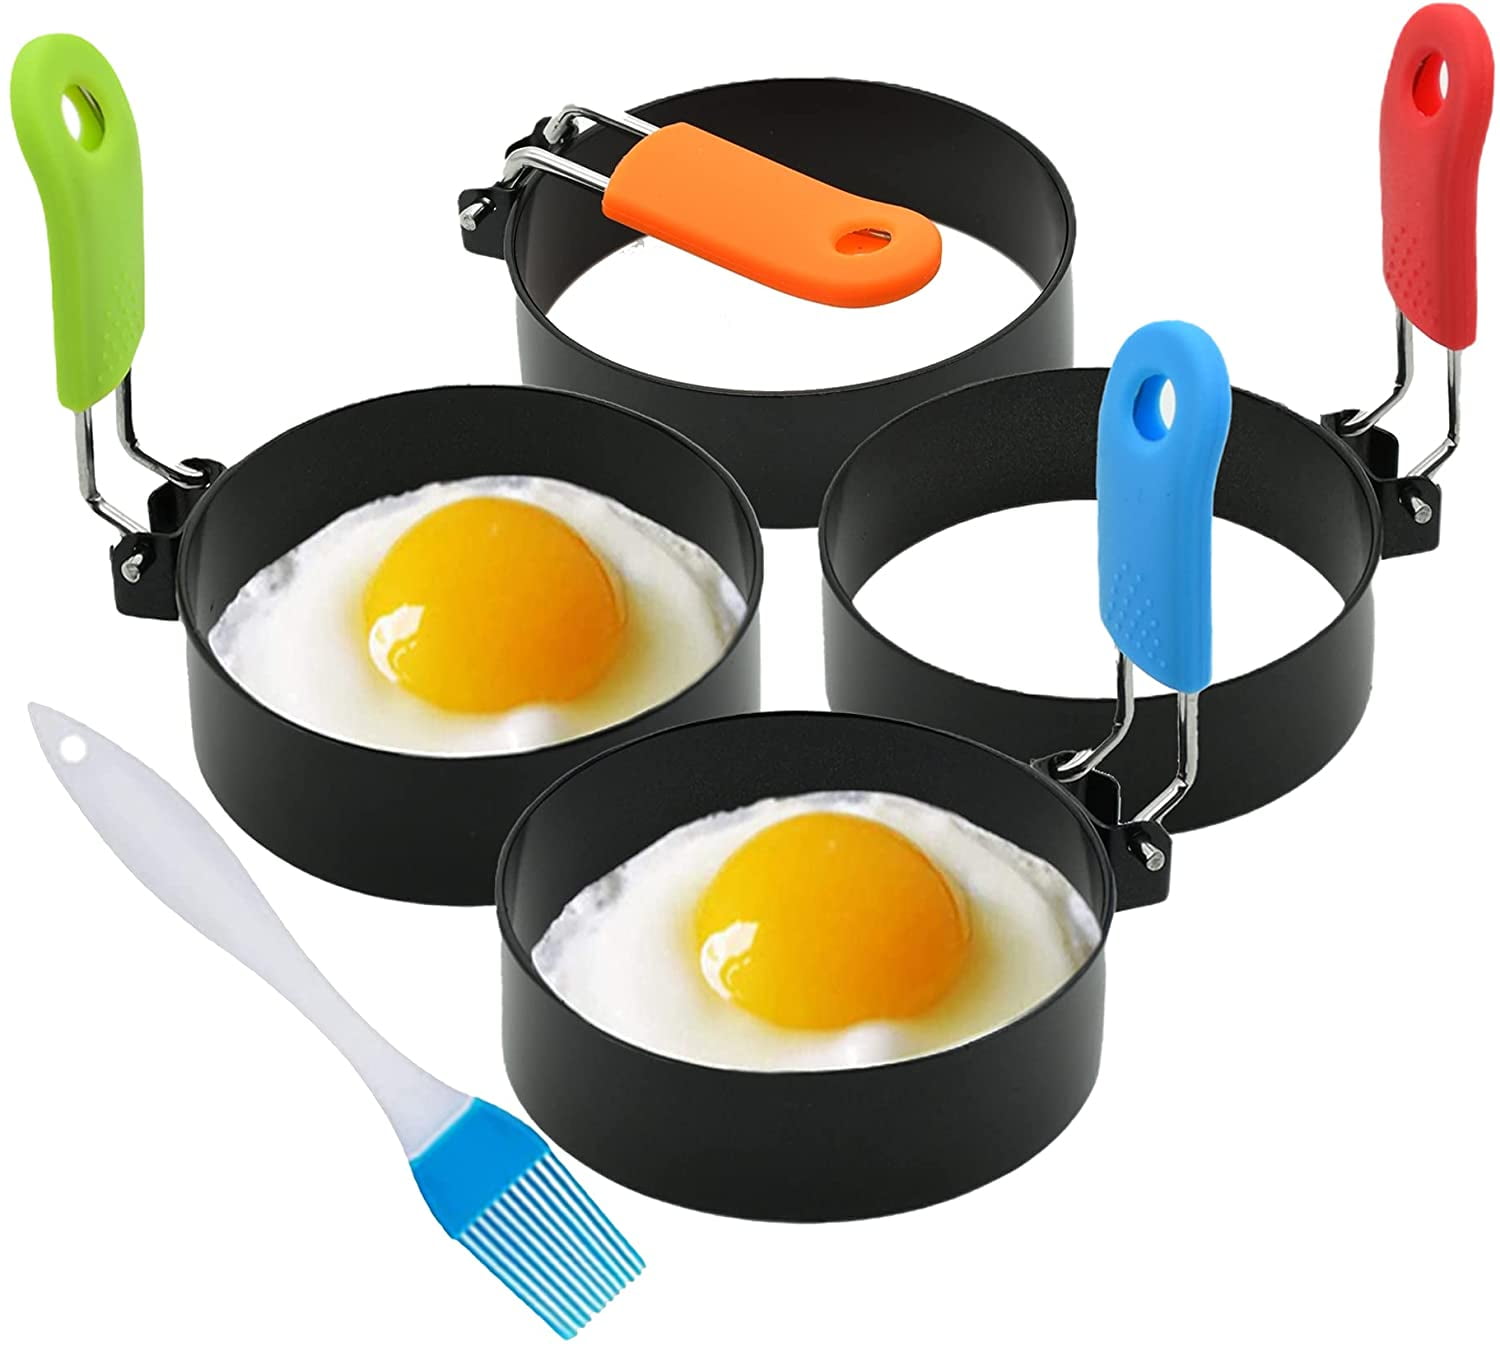 4Pcs Shaped Stainless Steel Cooking Fried Egg Pancake Ring Mold Kitchen tools de 